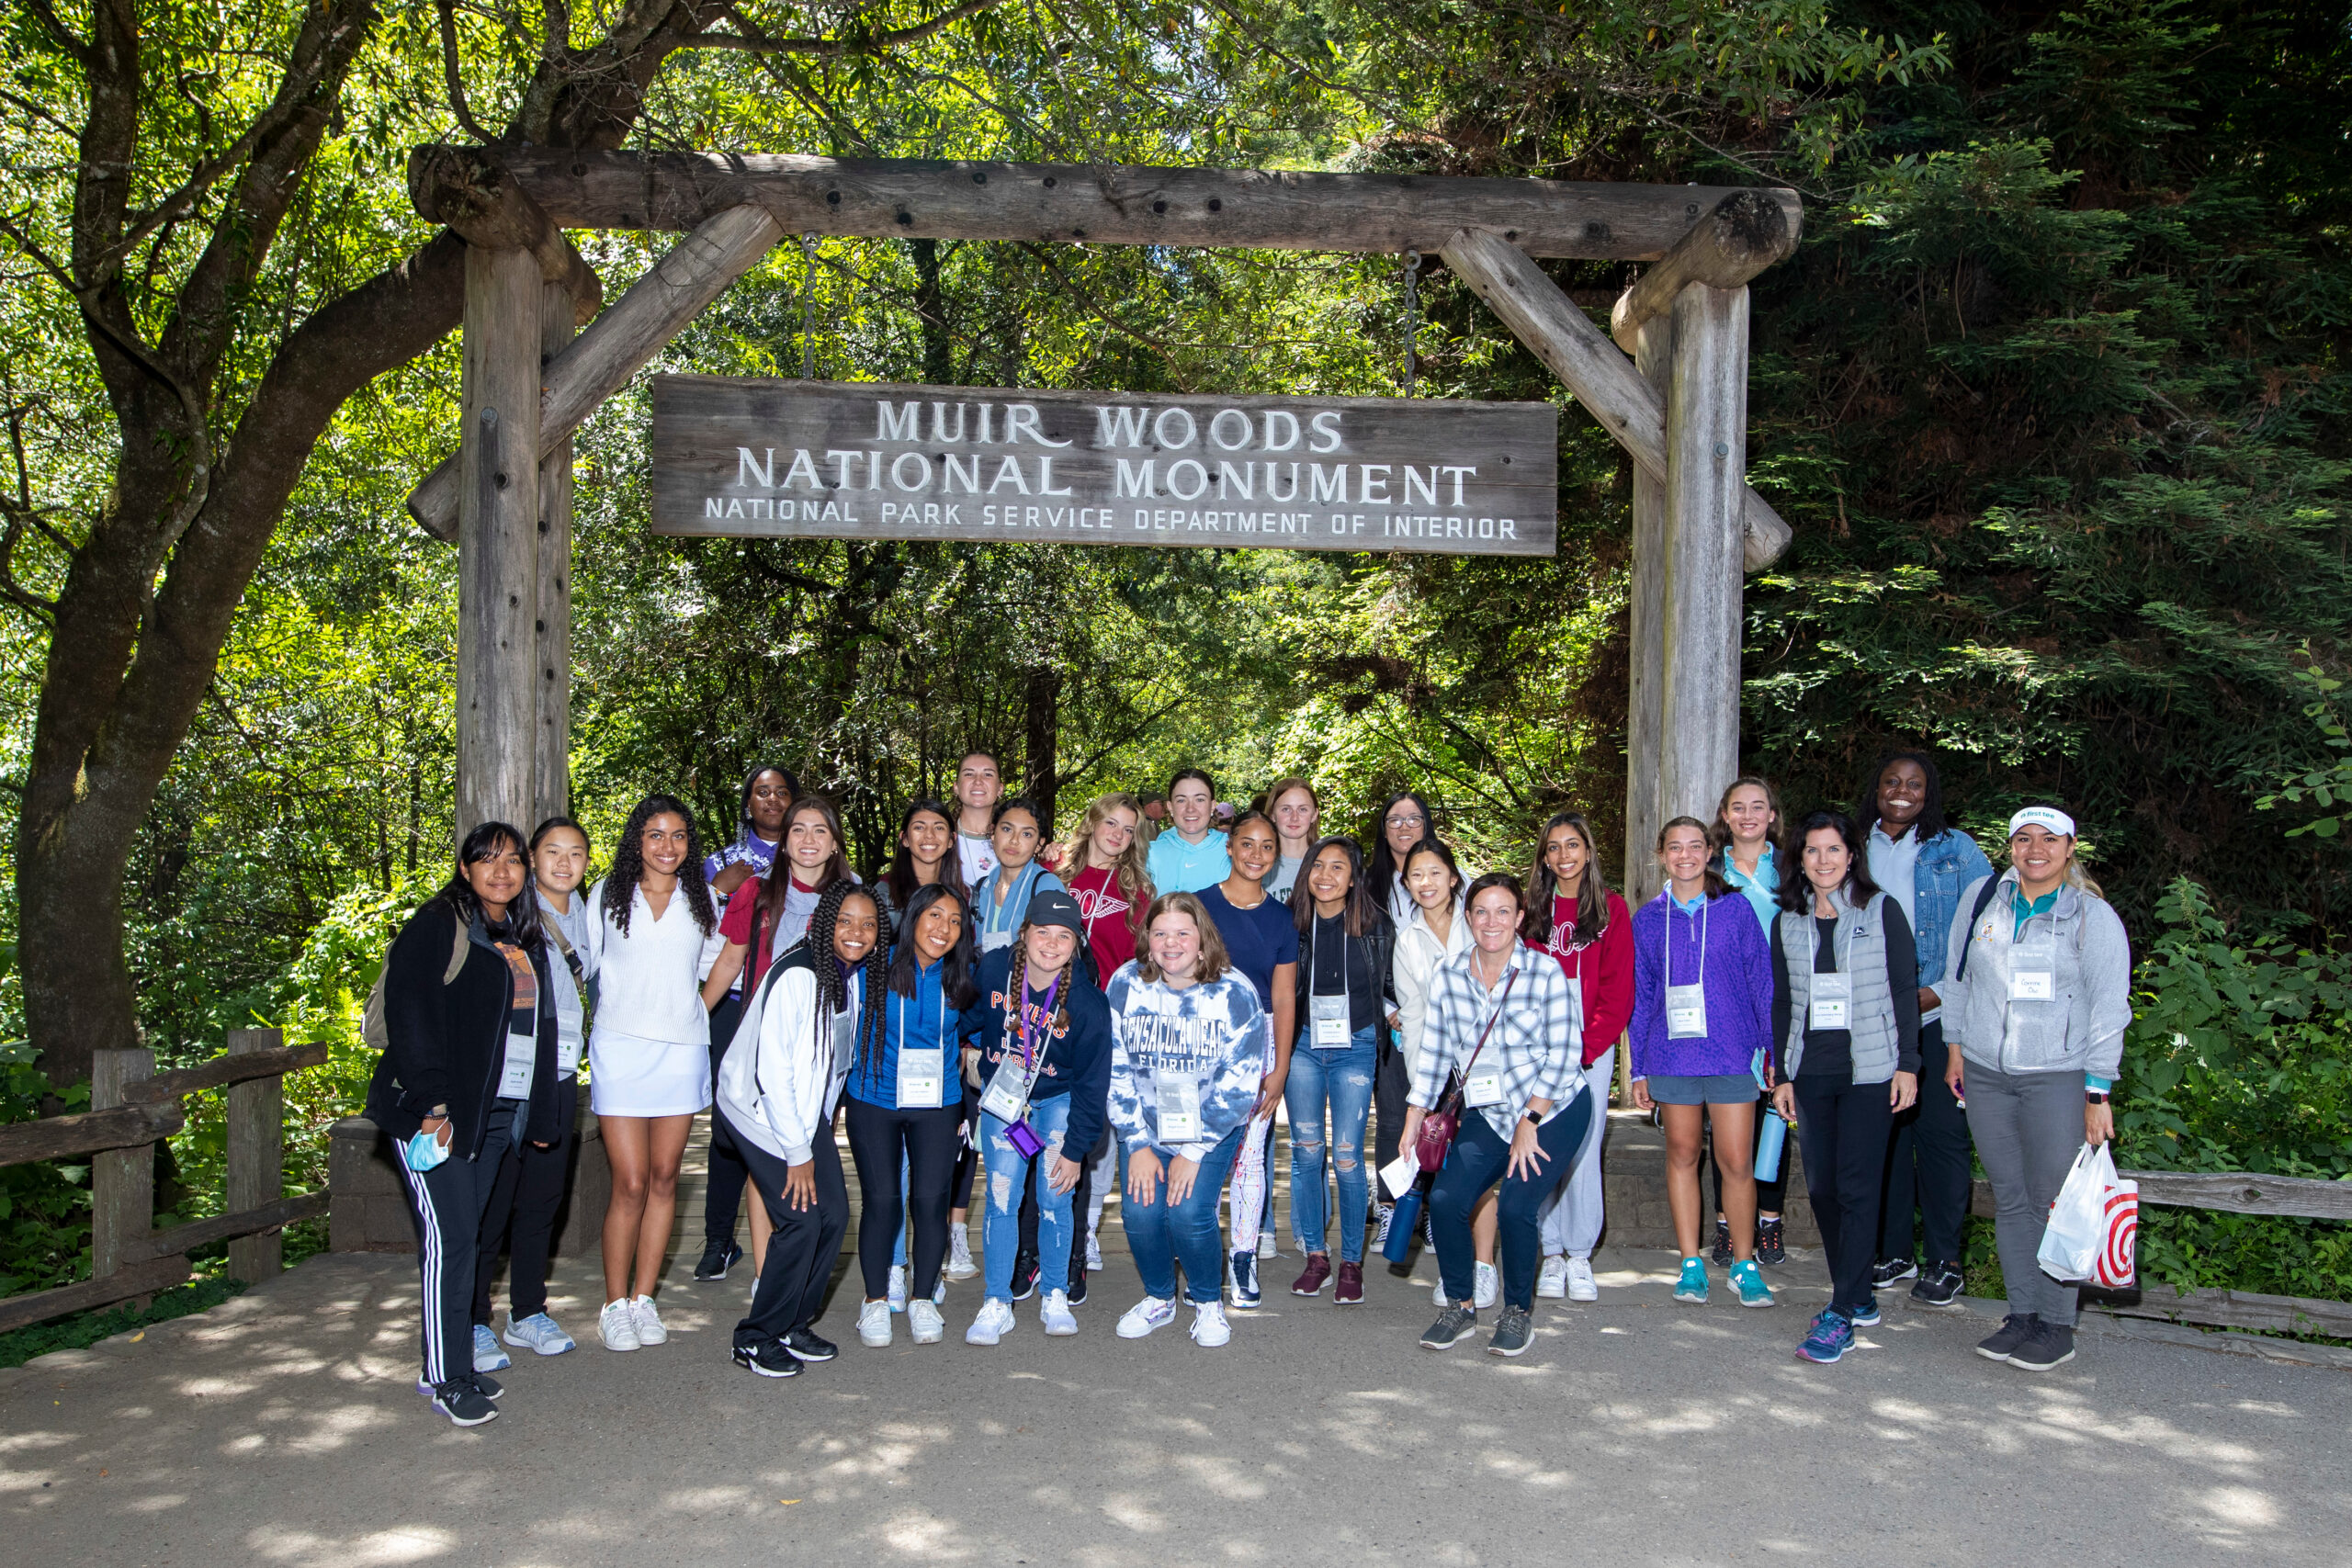 Group of participants posing at the Muir Woods National Monument.